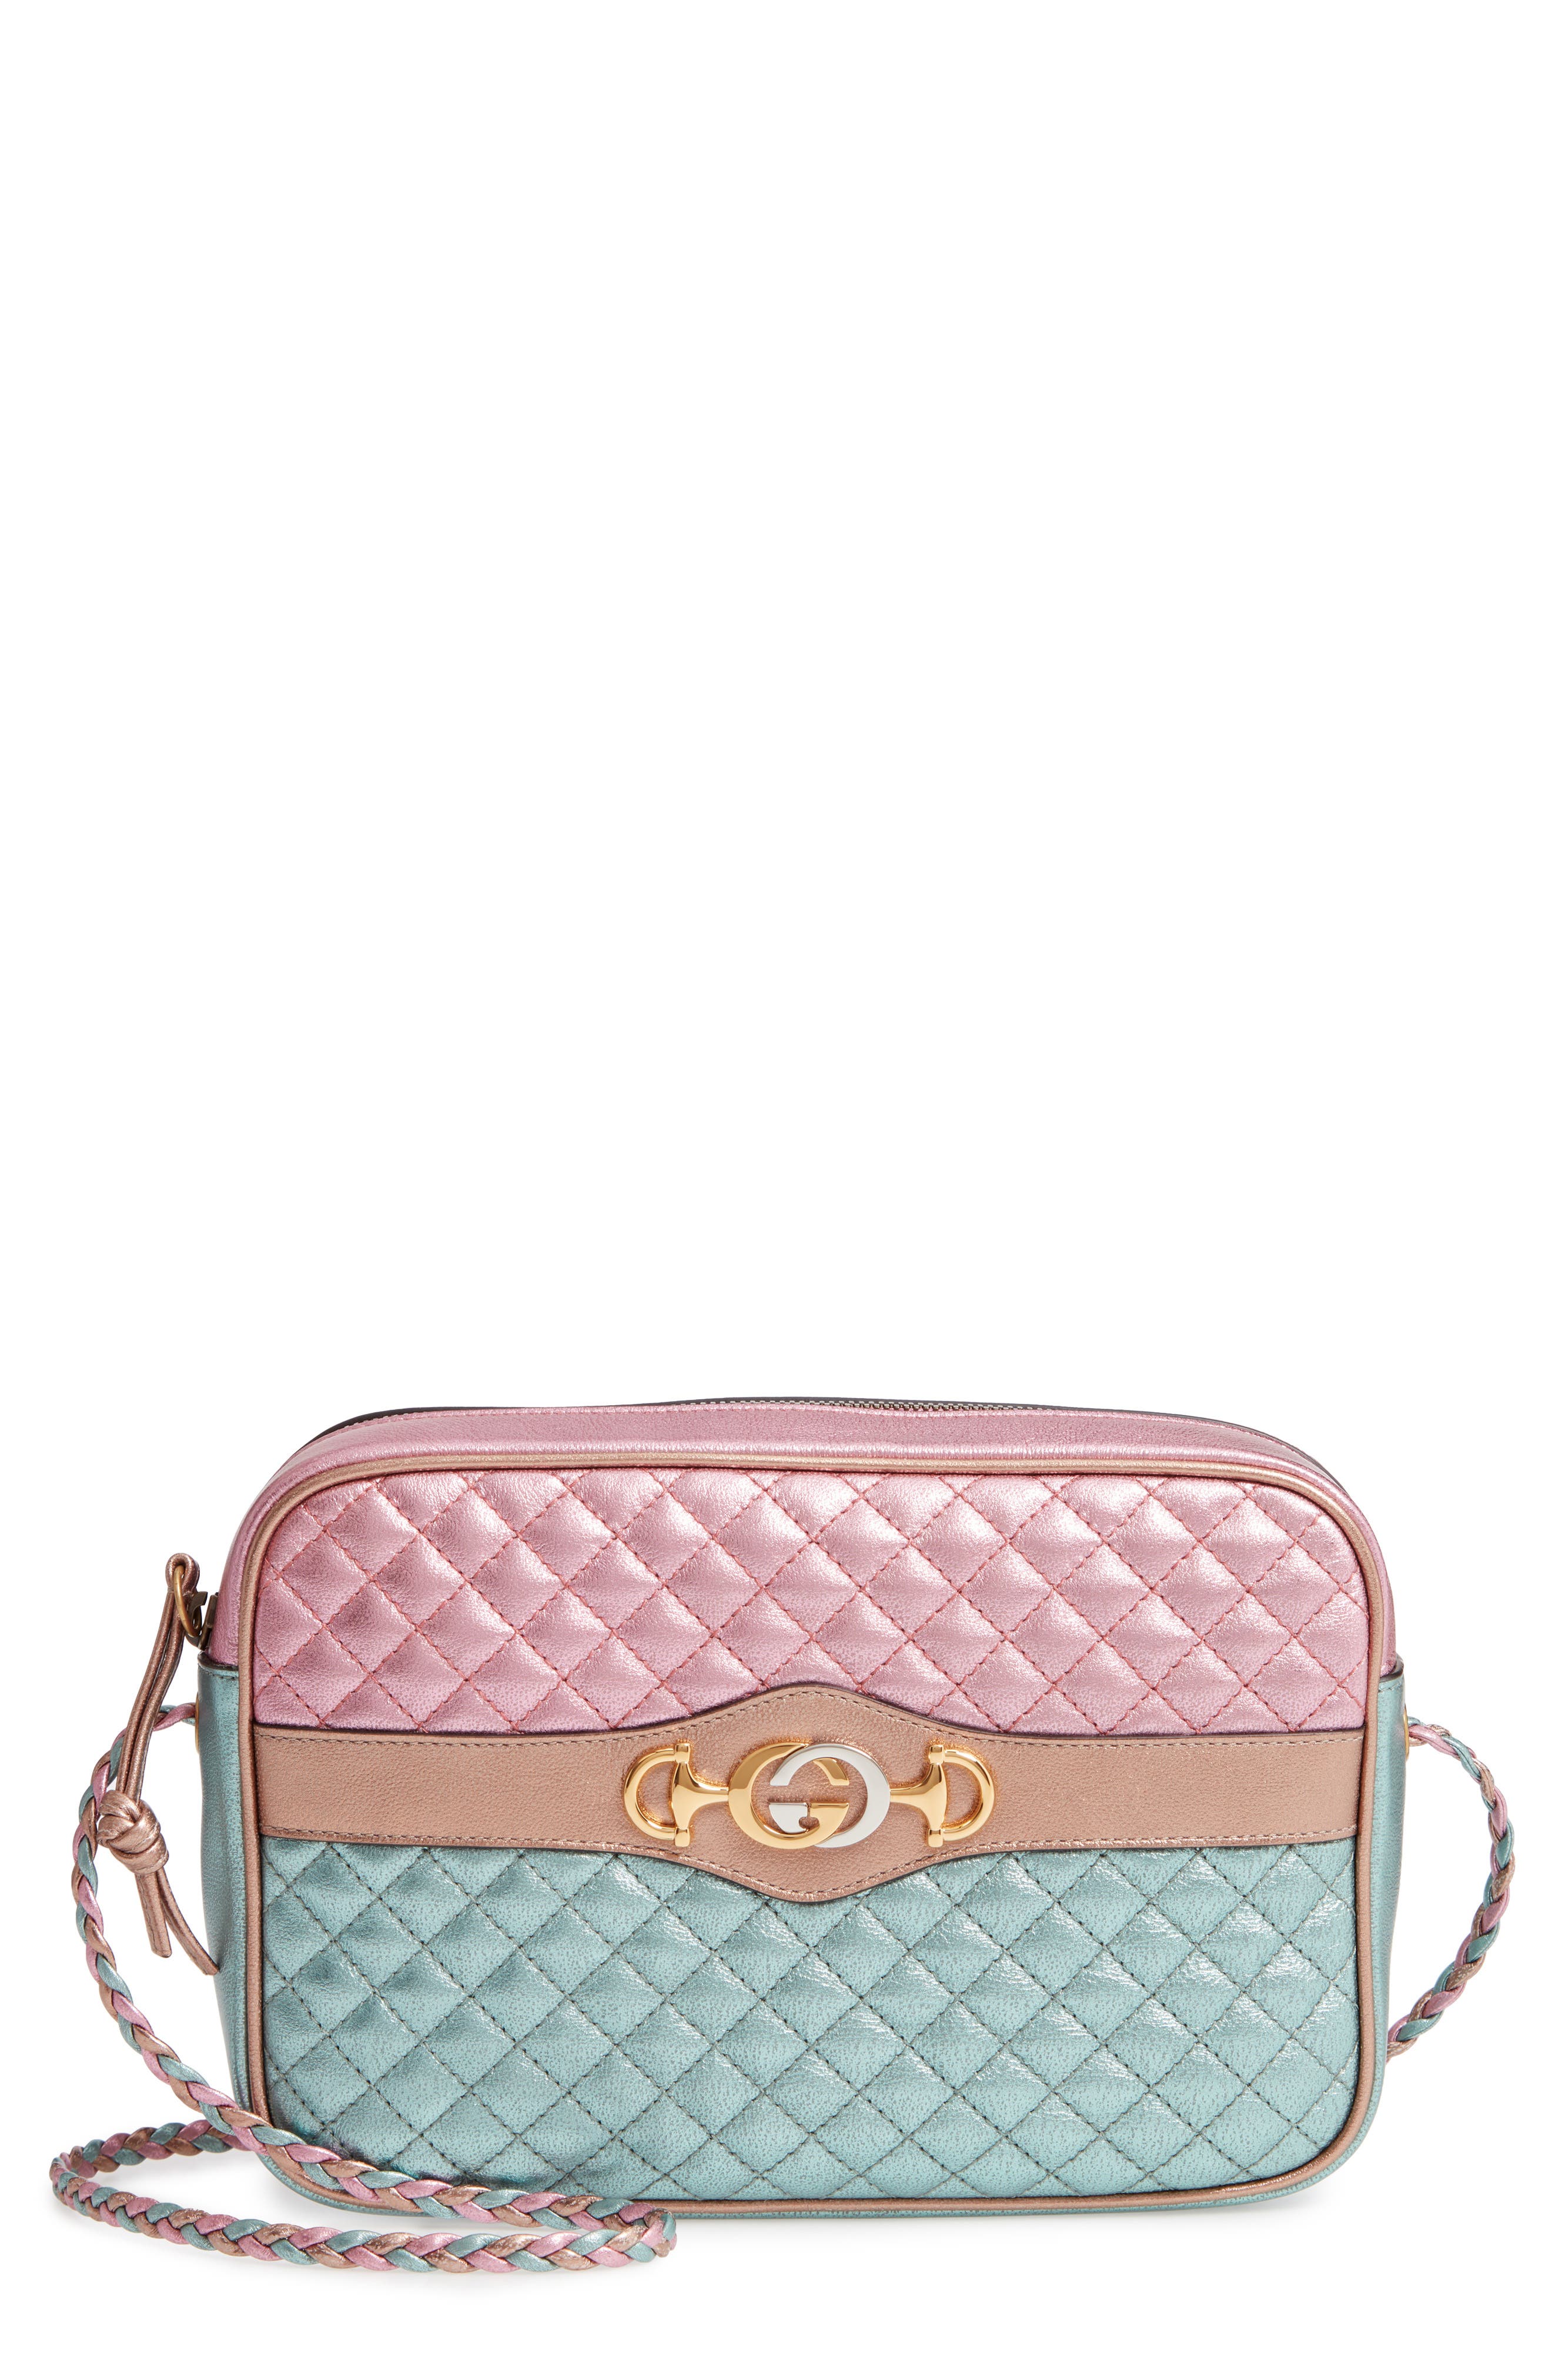 pink and green gucci purse